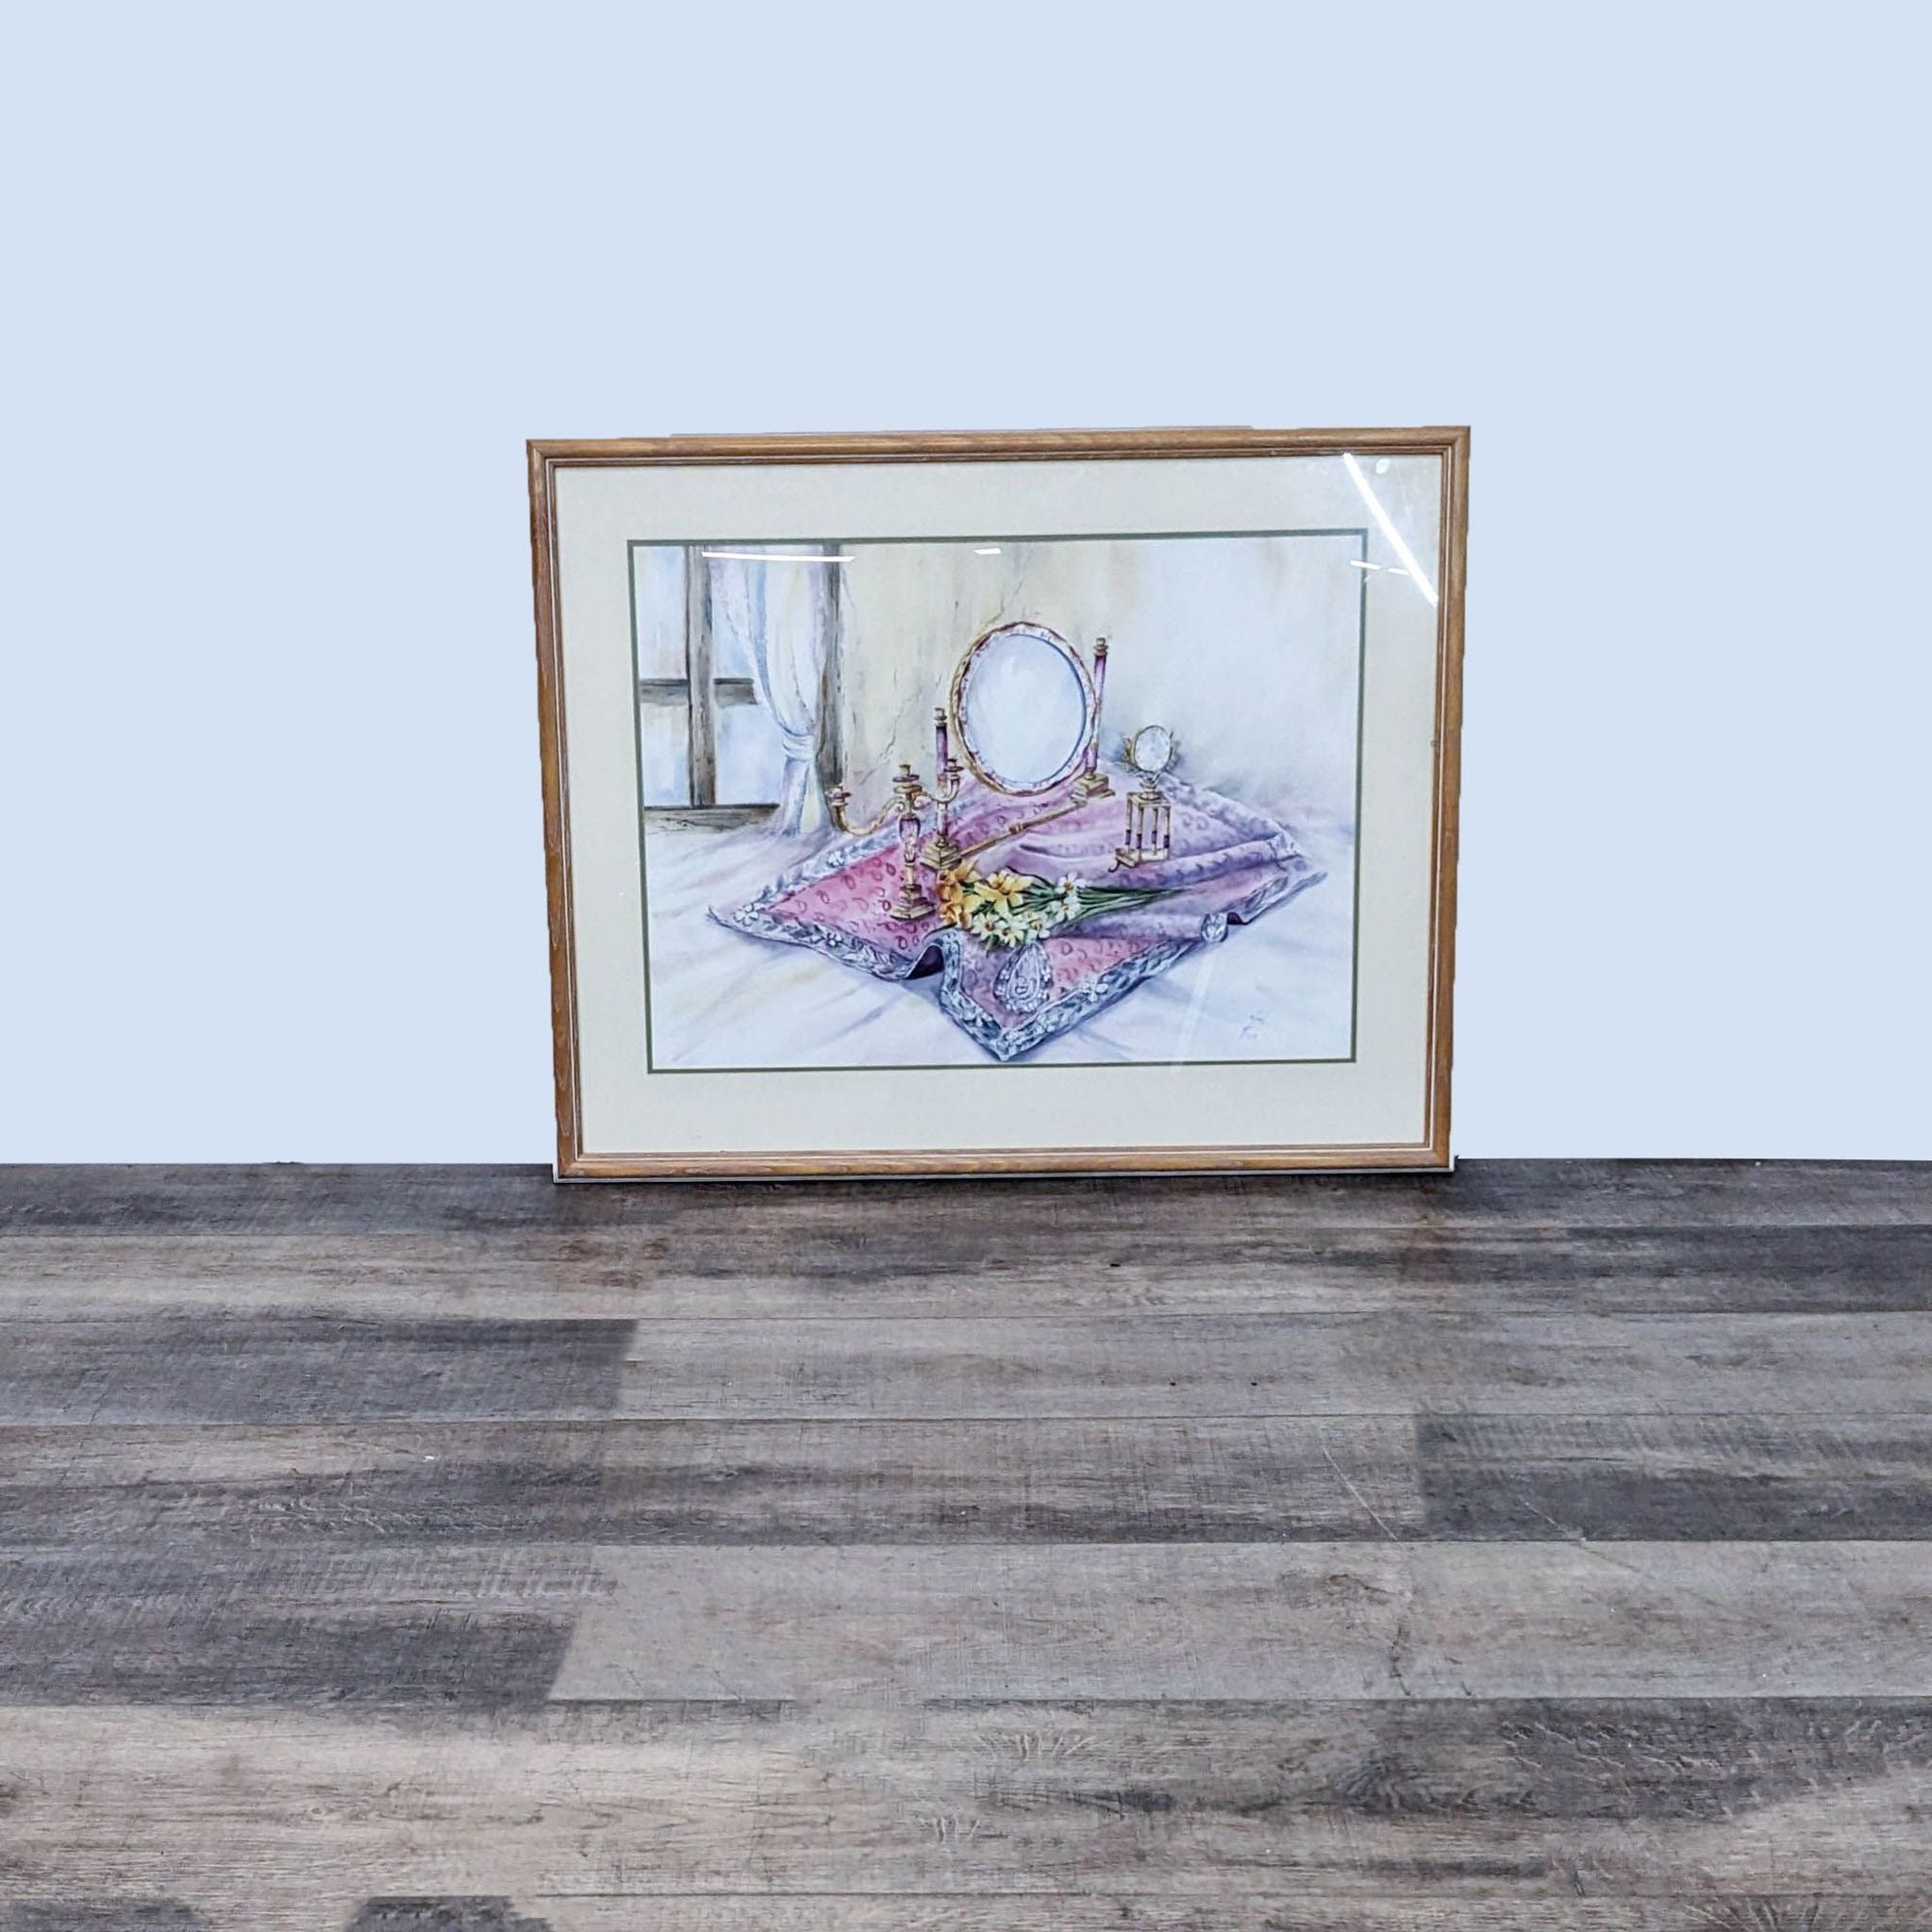 Alt text: Framed painting by Reperch depicting a vanity with a mirror, flowers, a clock, and a candleholder, dated 2017.